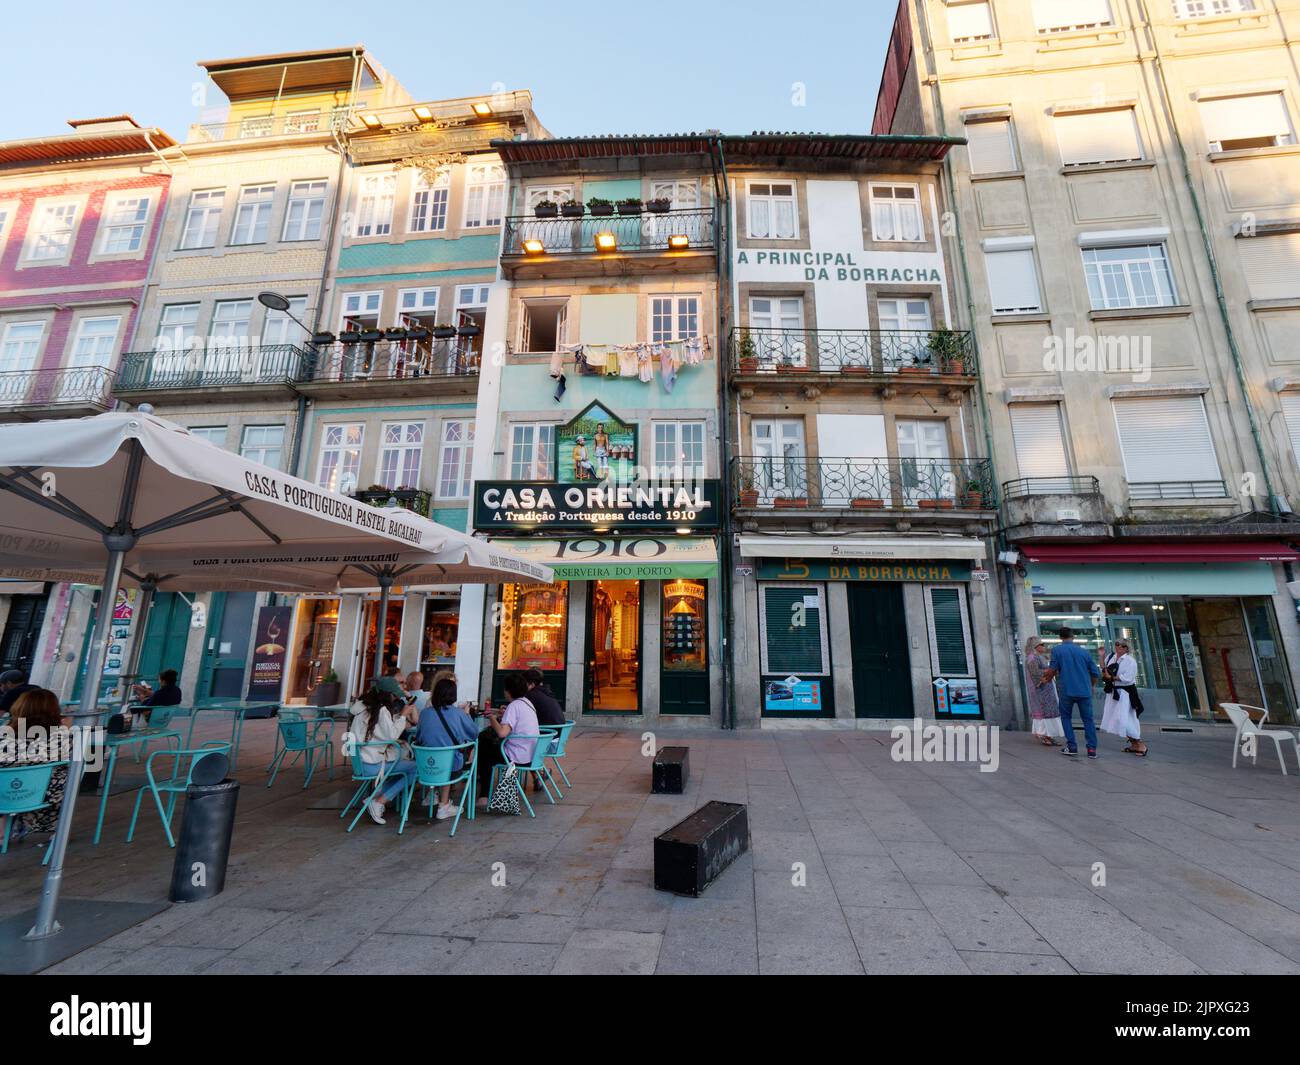 Exterior of Restaurant and buildings in the Clérigos district of Porto, Portugal on a summers evening. Stock Photo